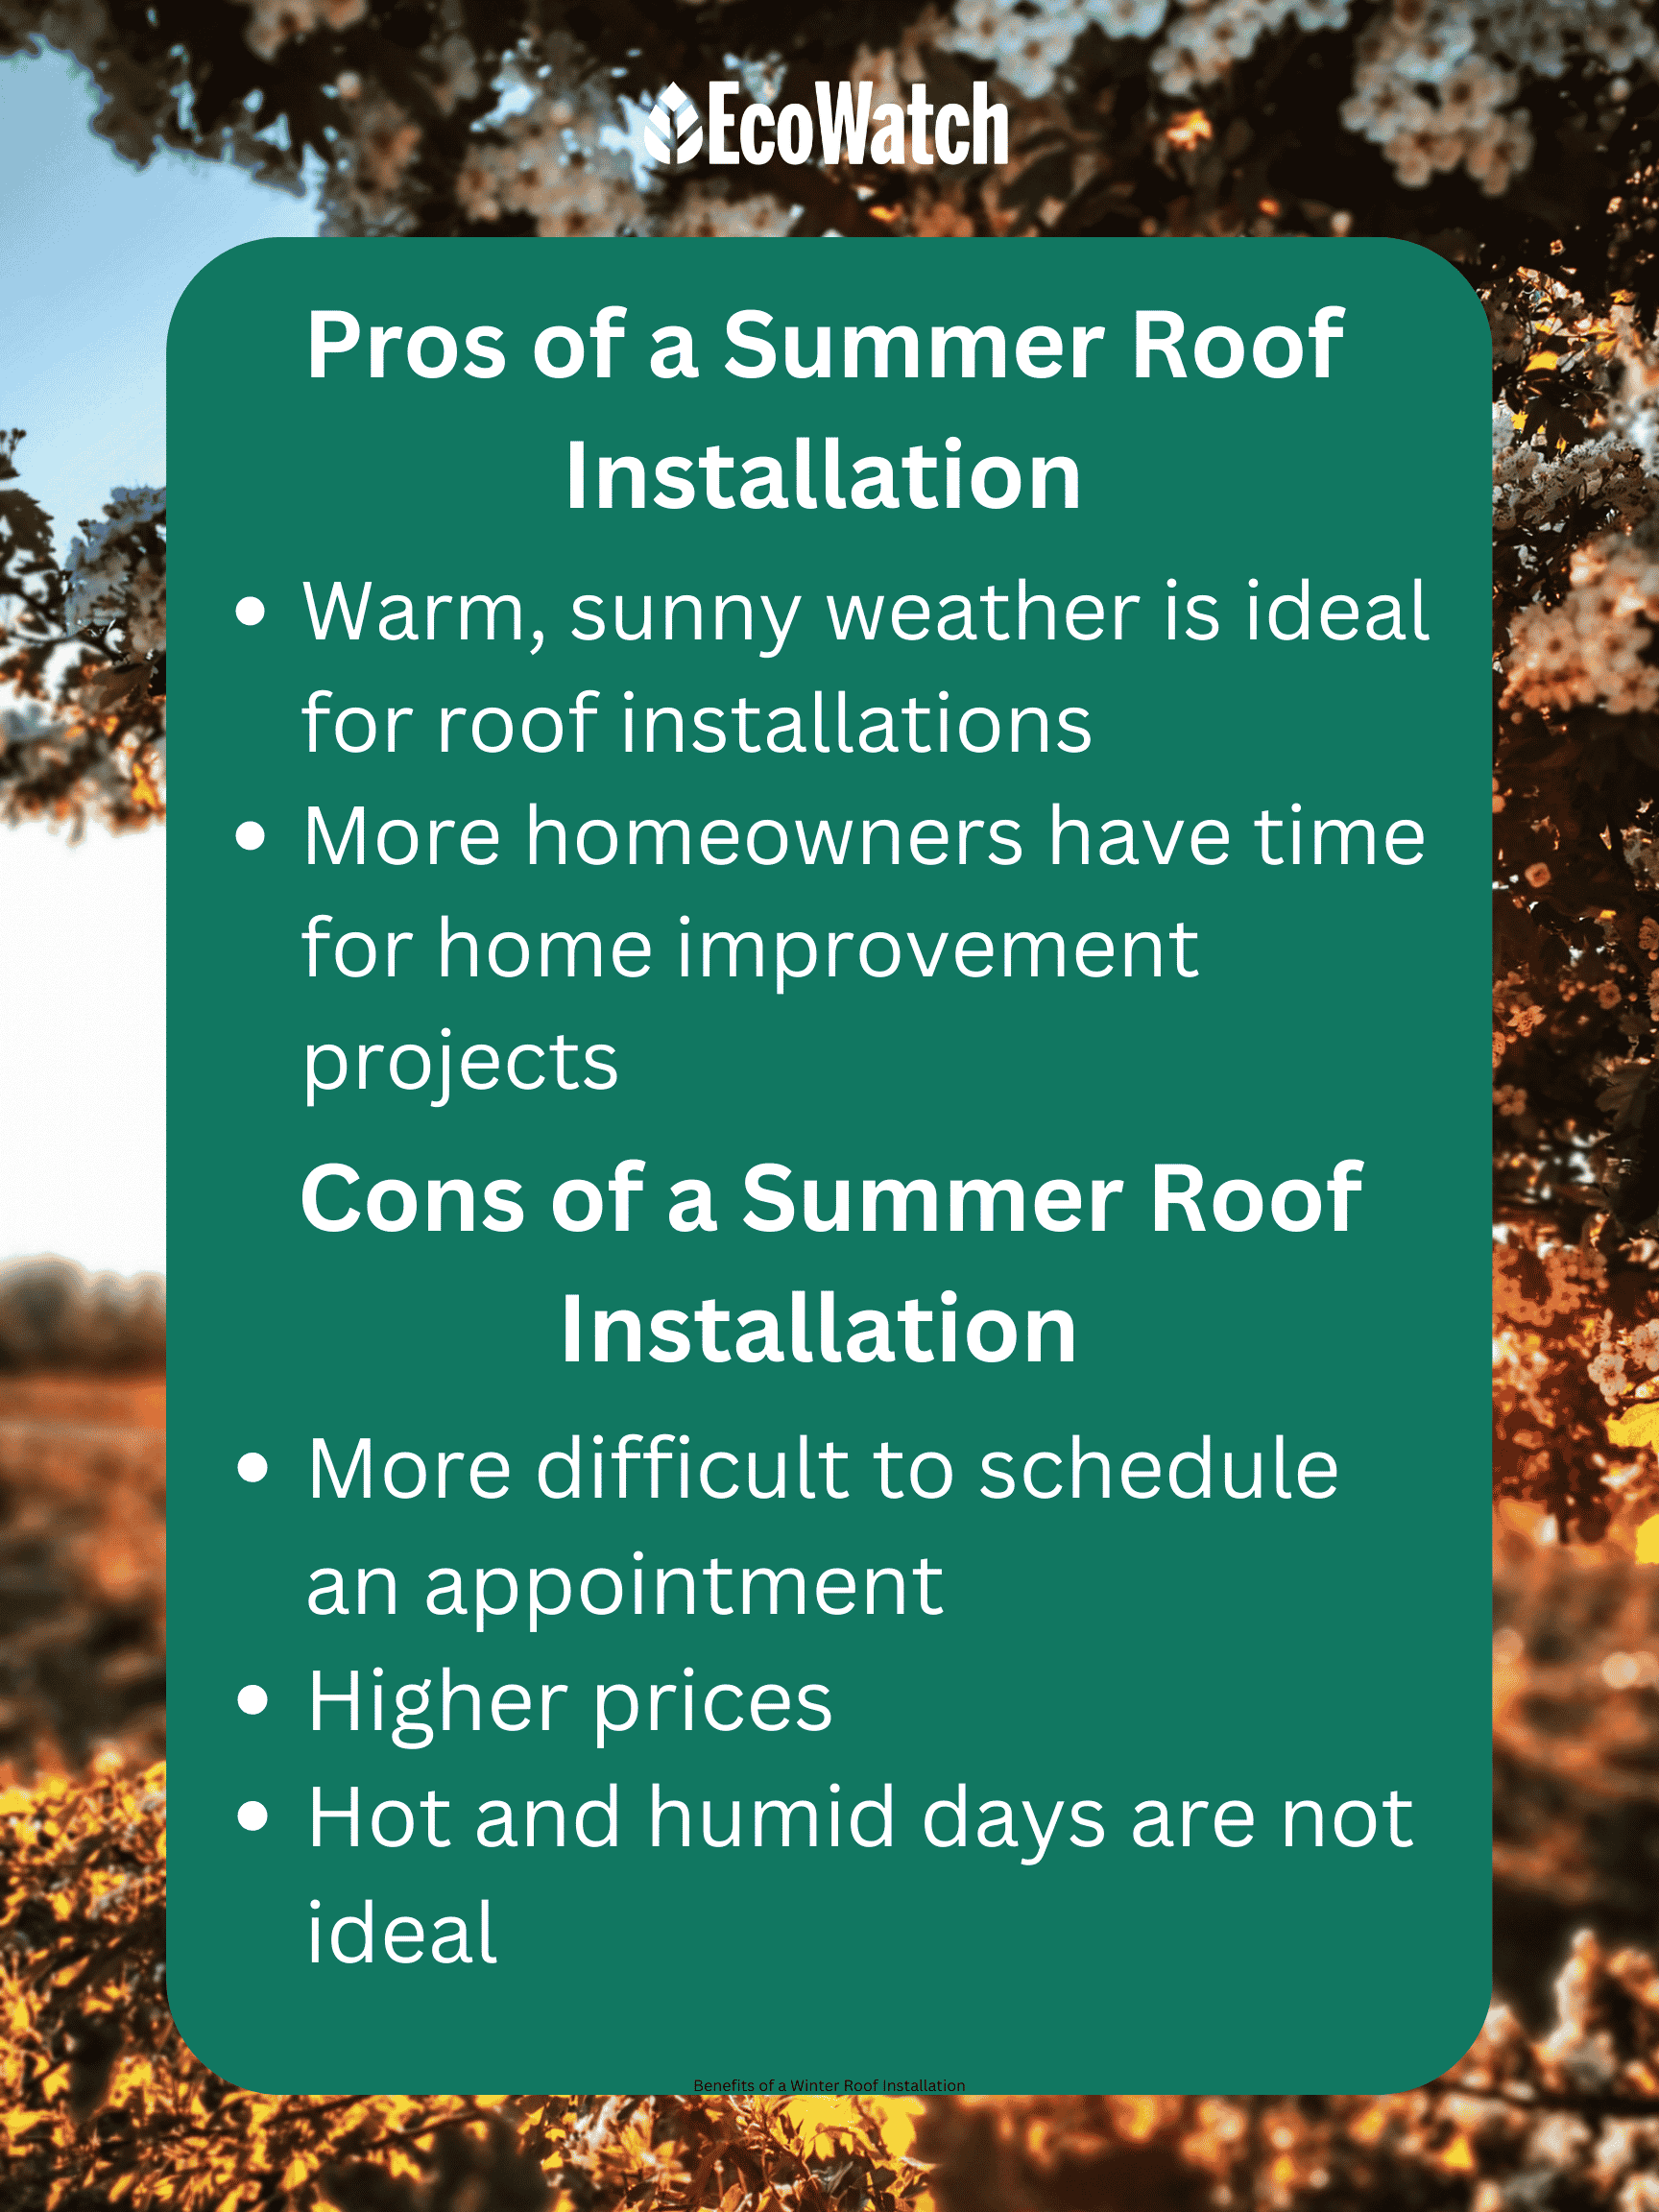 Pros and cons of a summer roof installation